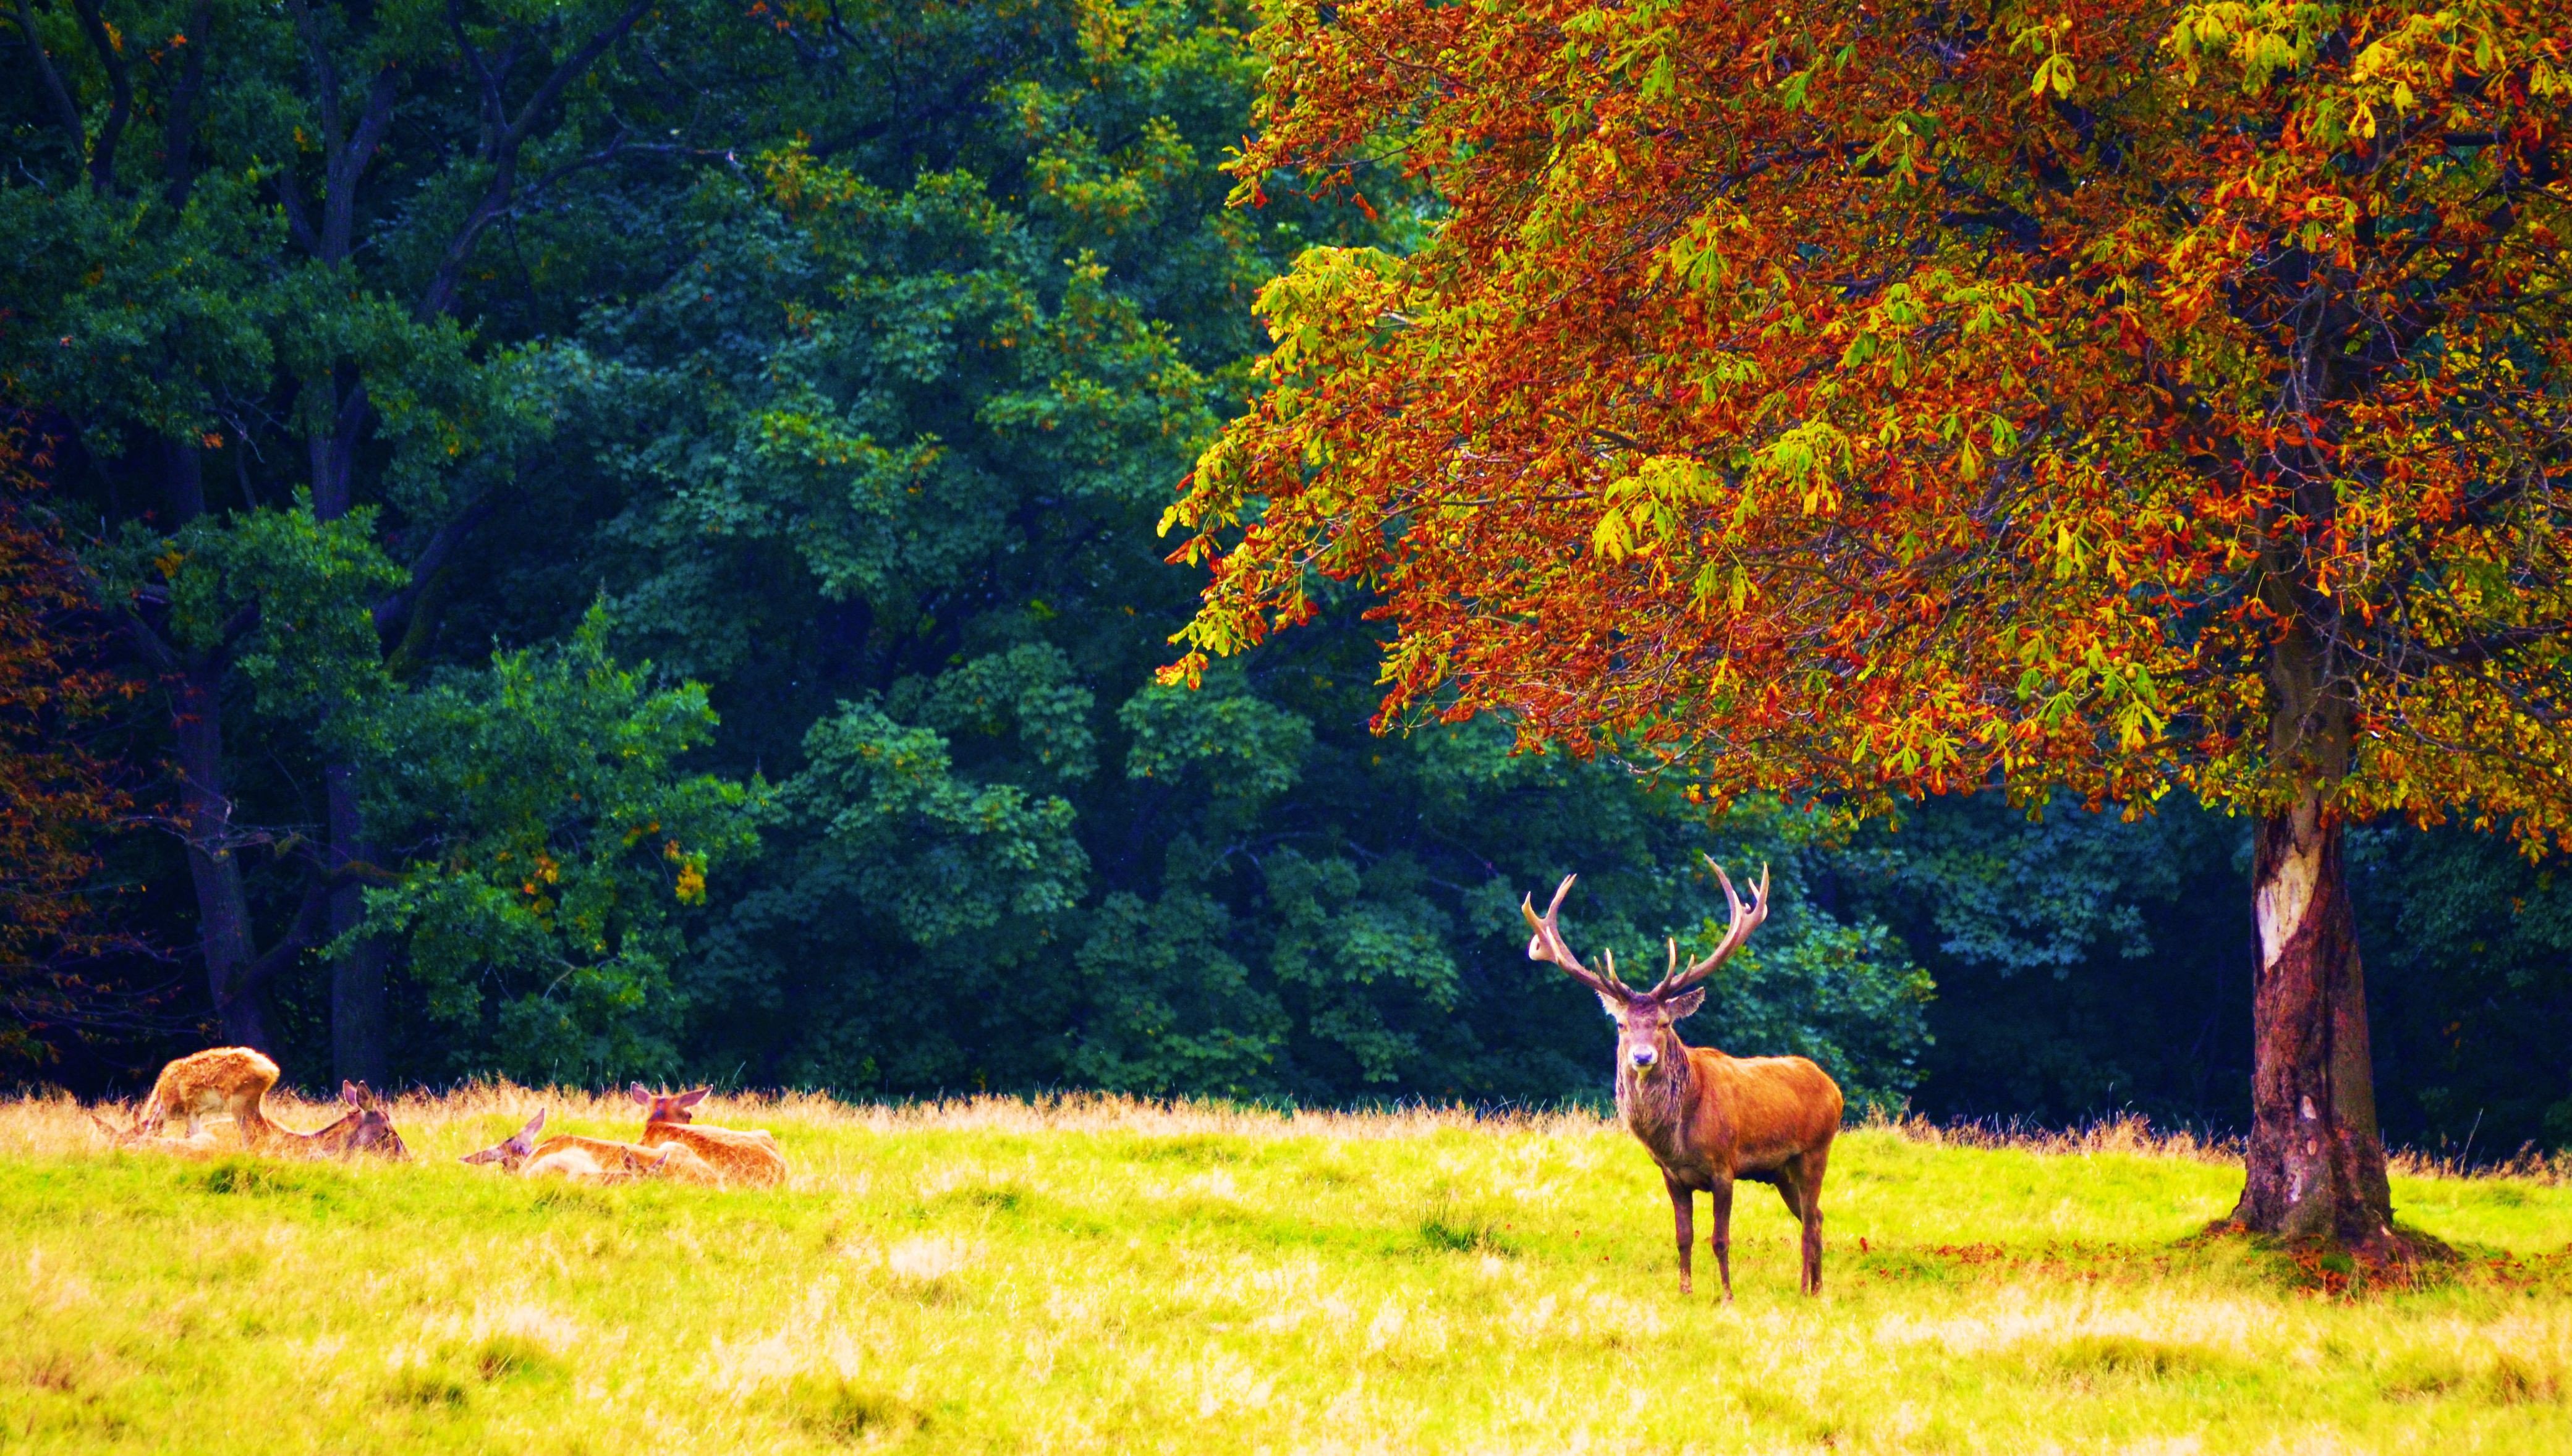 Forest Trees Nature Landscape Tree Autumn Deer Wallpaper - Forest Background With Deer , HD Wallpaper & Backgrounds